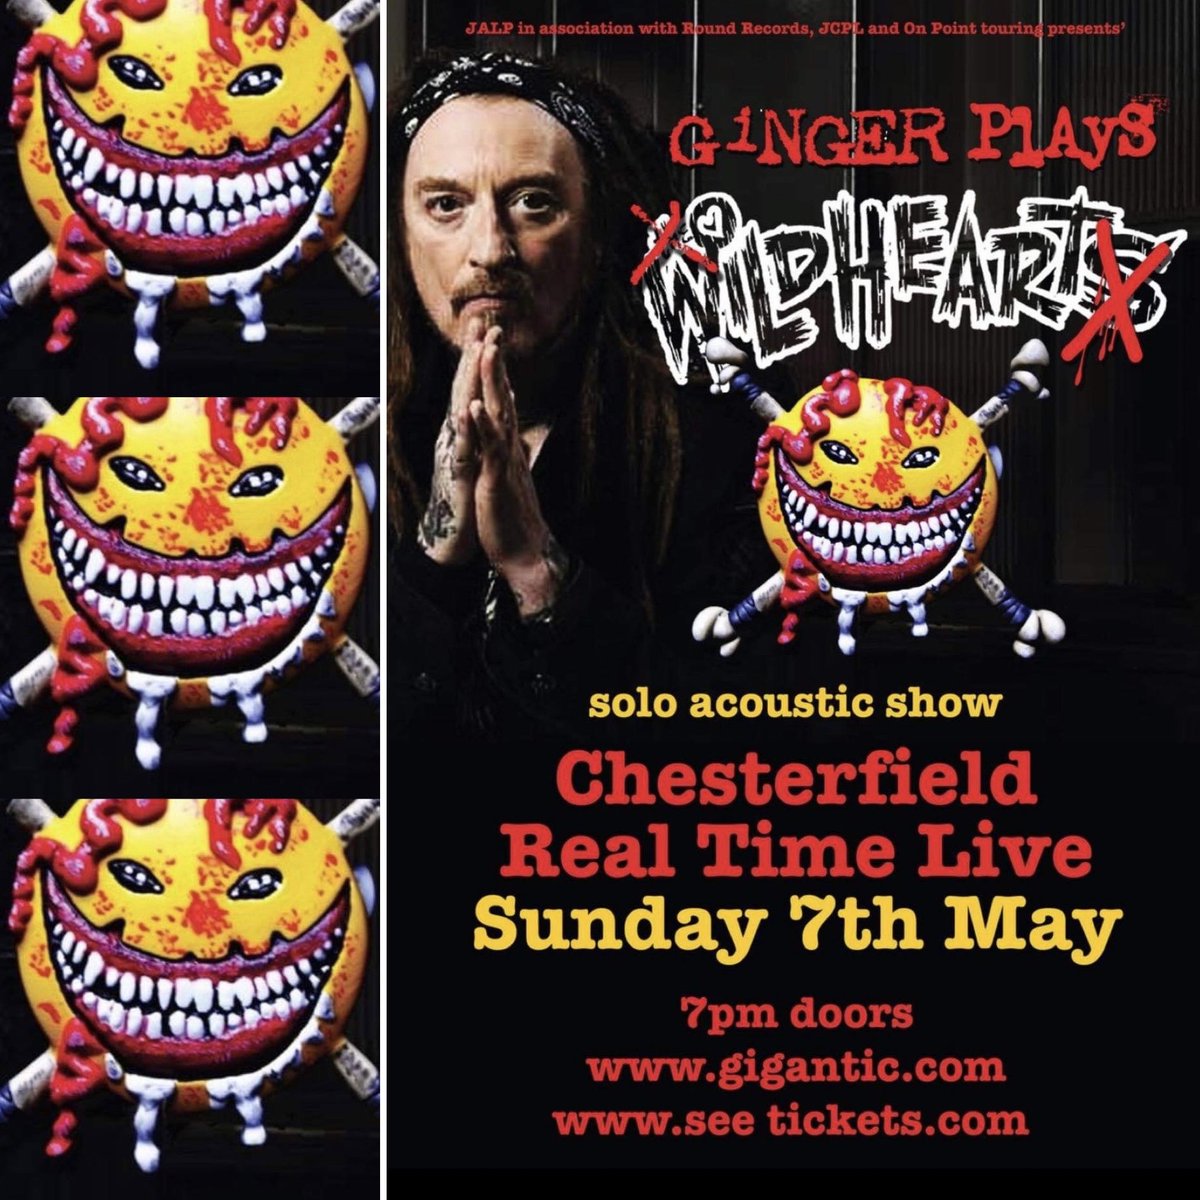 The @GingerWildheart plays @TheWildhearts UK Tour’s about to begin+come see us at ⁦@RealTimeLive1⁩ Chesterfield on 7th May w/ ⁦@carolxhodge⁩, @benmarsdenmusic+I as guests. TICKETS: seetickets.com/event/ginger-w… ⁦@RoundRecords⁩ ⁦@jcplmusic⁩ ⁦@onpointtouring⁩